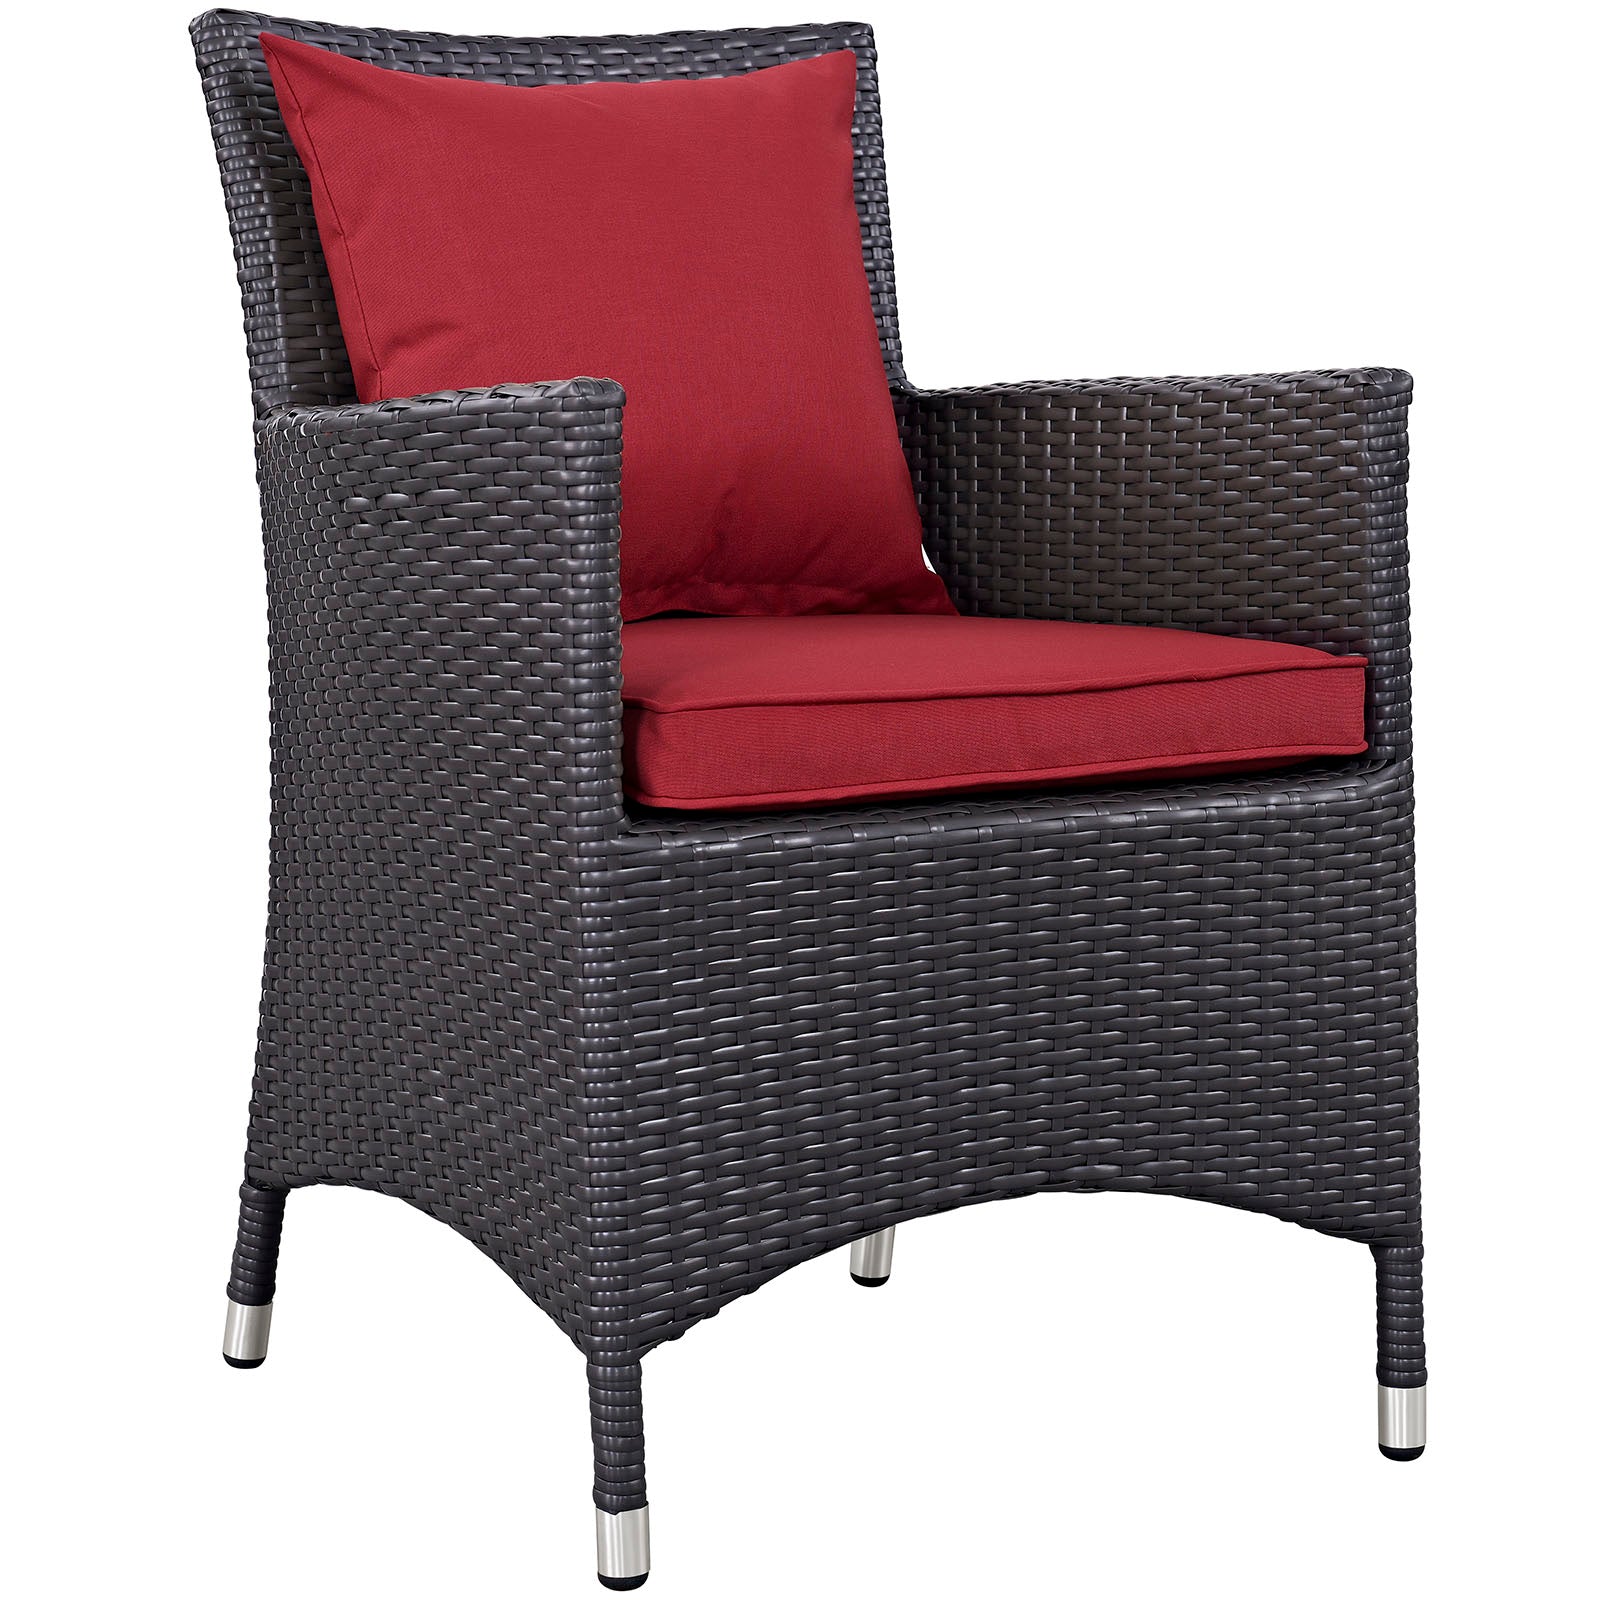 Modway Outdoor Dining Sets - Convene 4 Piece Outdoor Patio Dining Set Espresso Red